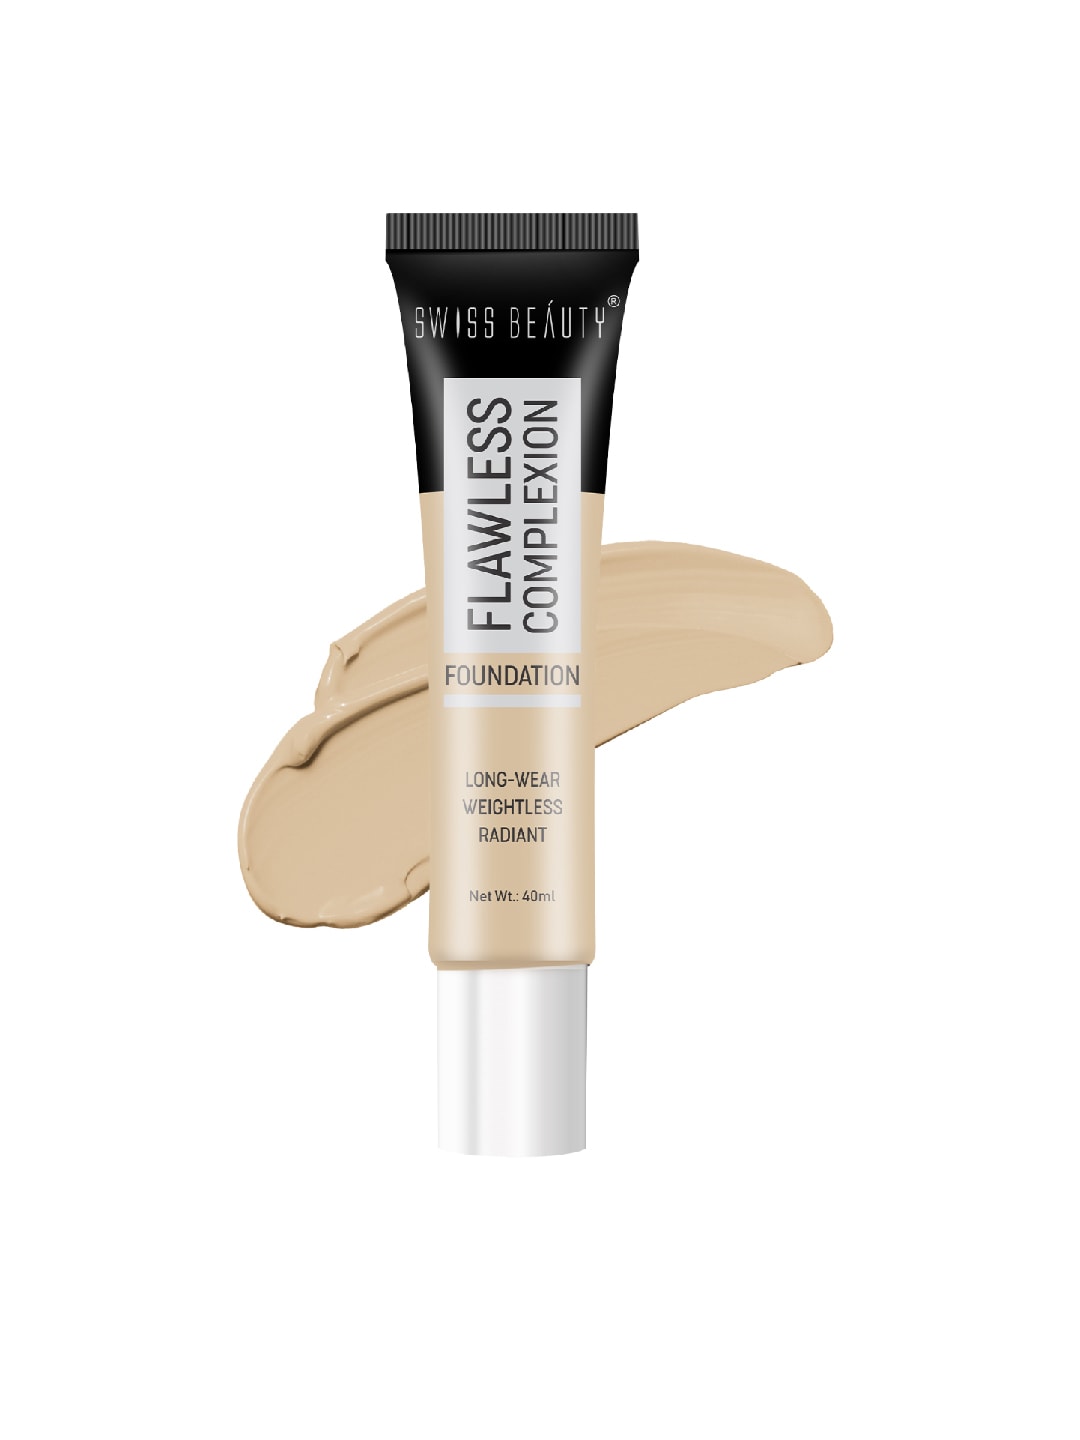 SWISS BEAUTY Flawless Complexion Foundation - Sand Beige 40 ml Price in India